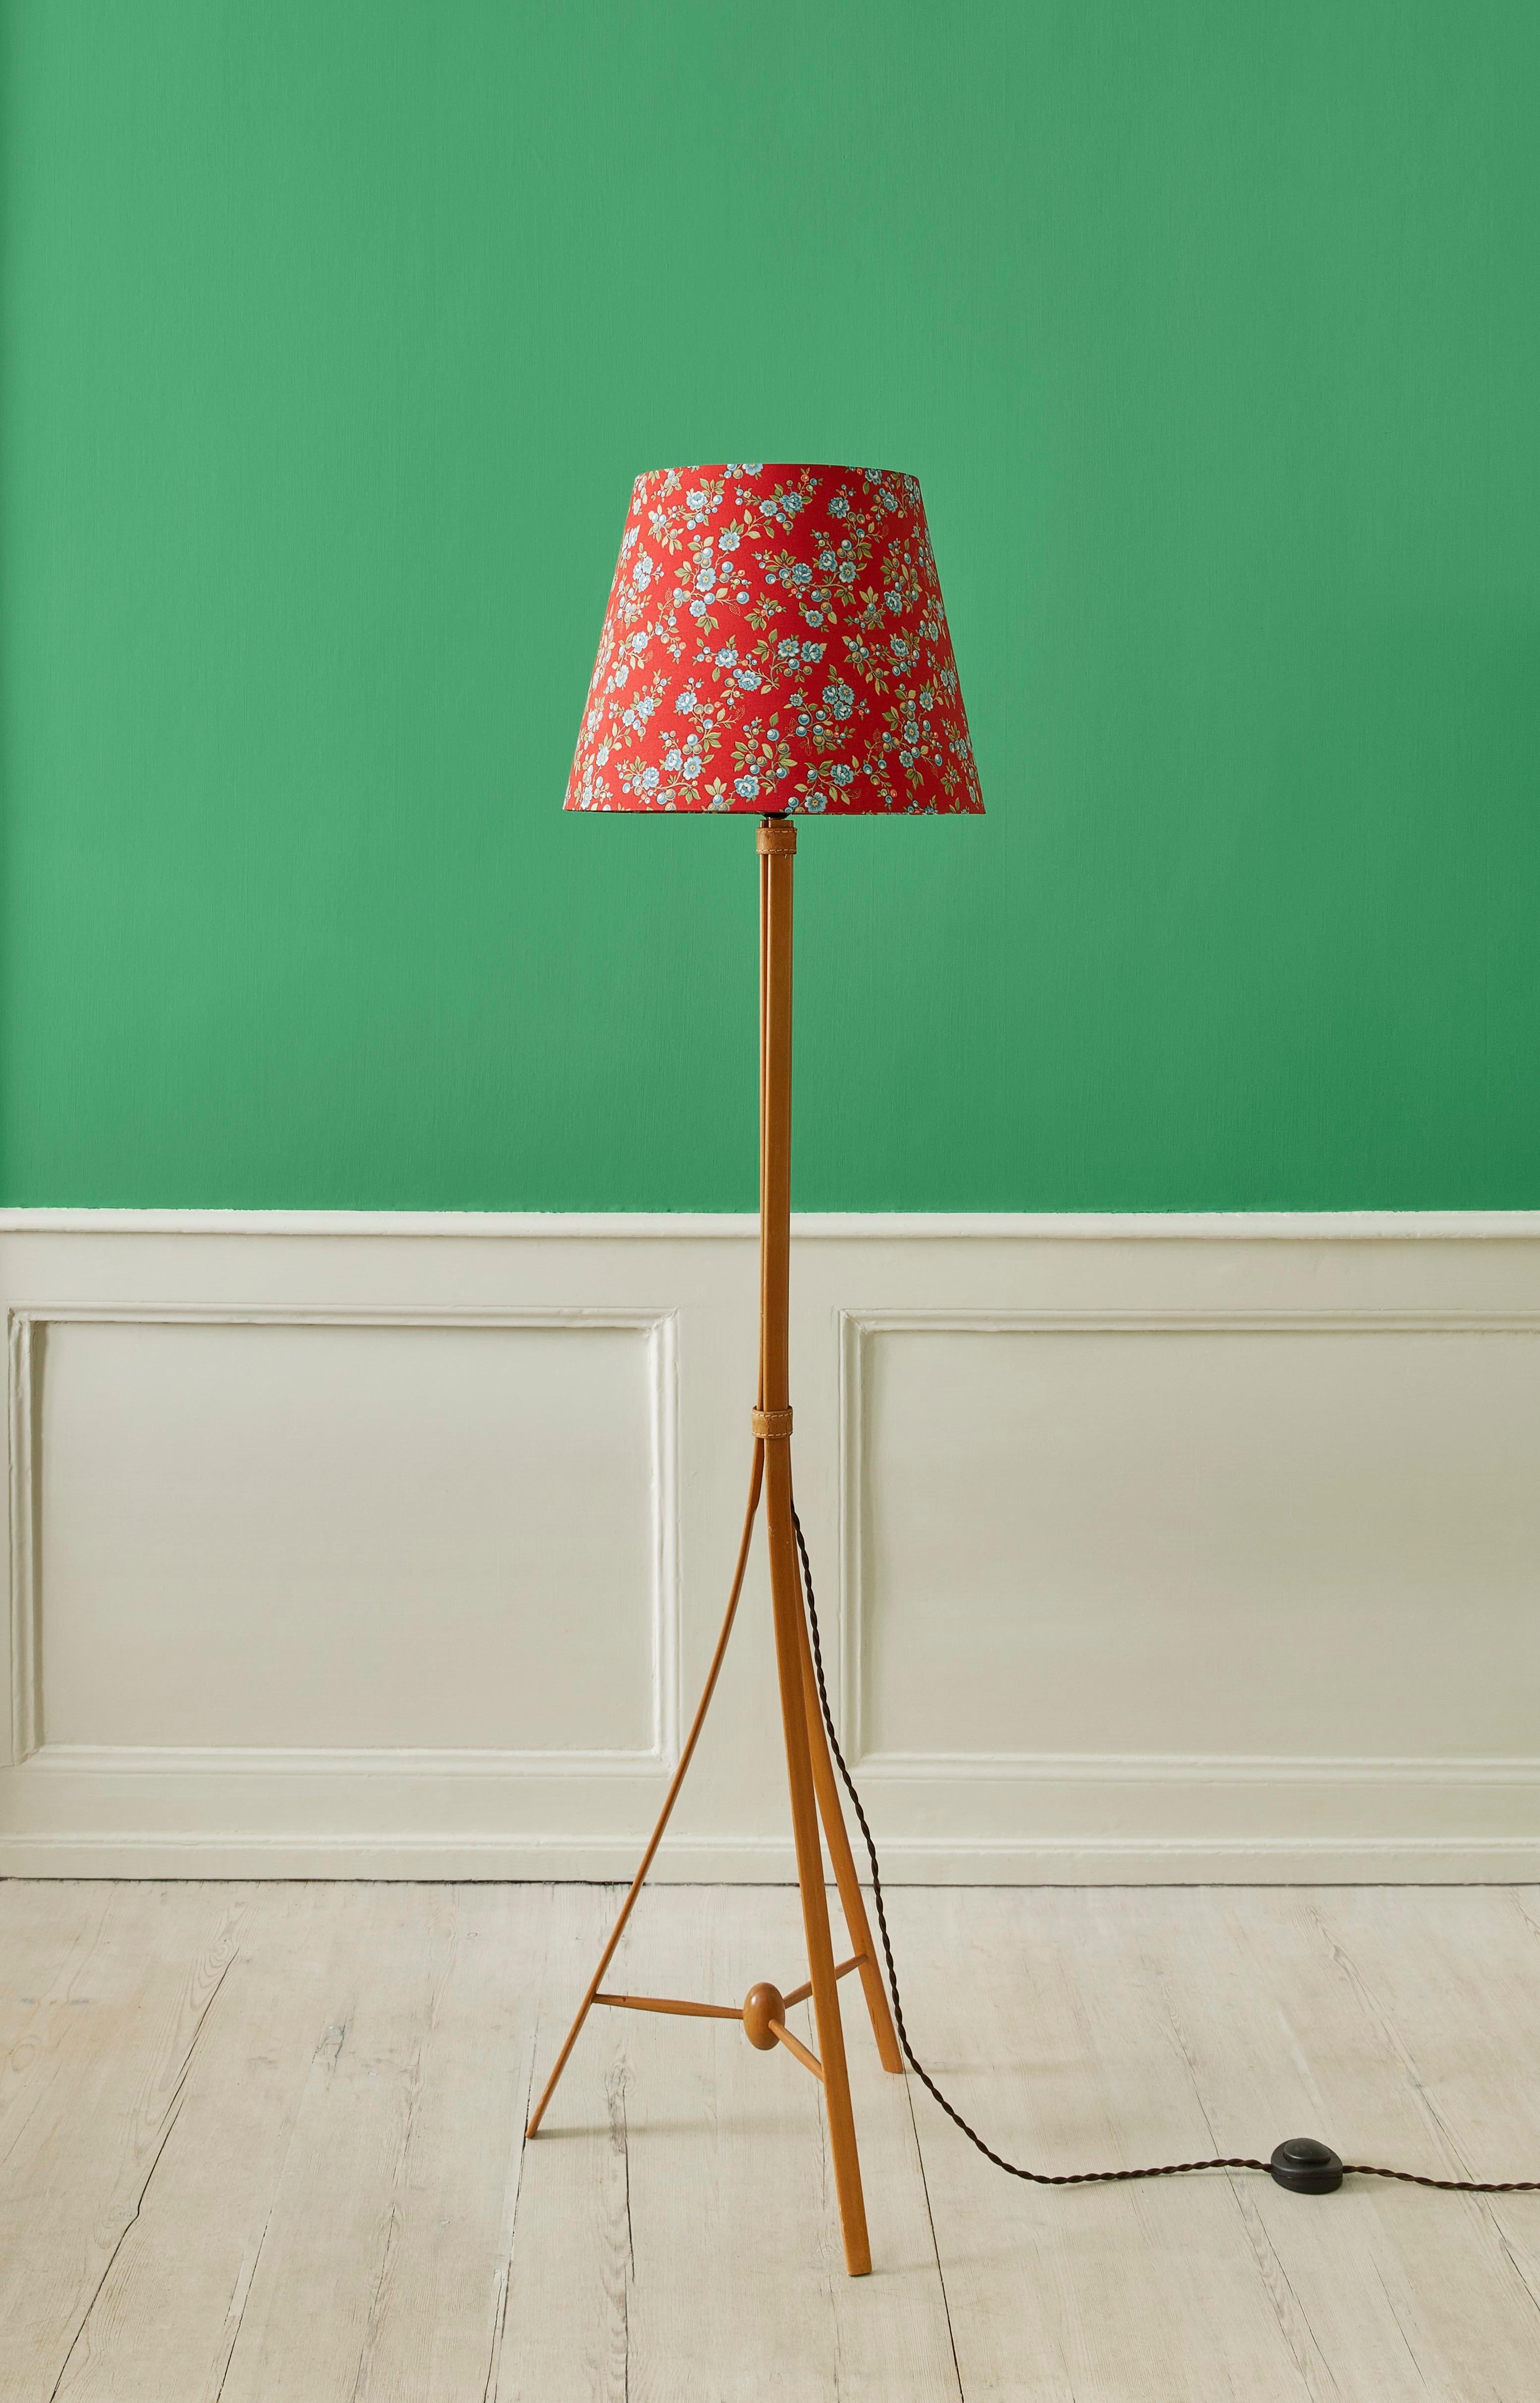 Alf Svensson 
Sweden, 1950s

Floor lamp in birch with customised shade by The Apartment.

H 142 x Ø 40 cm.